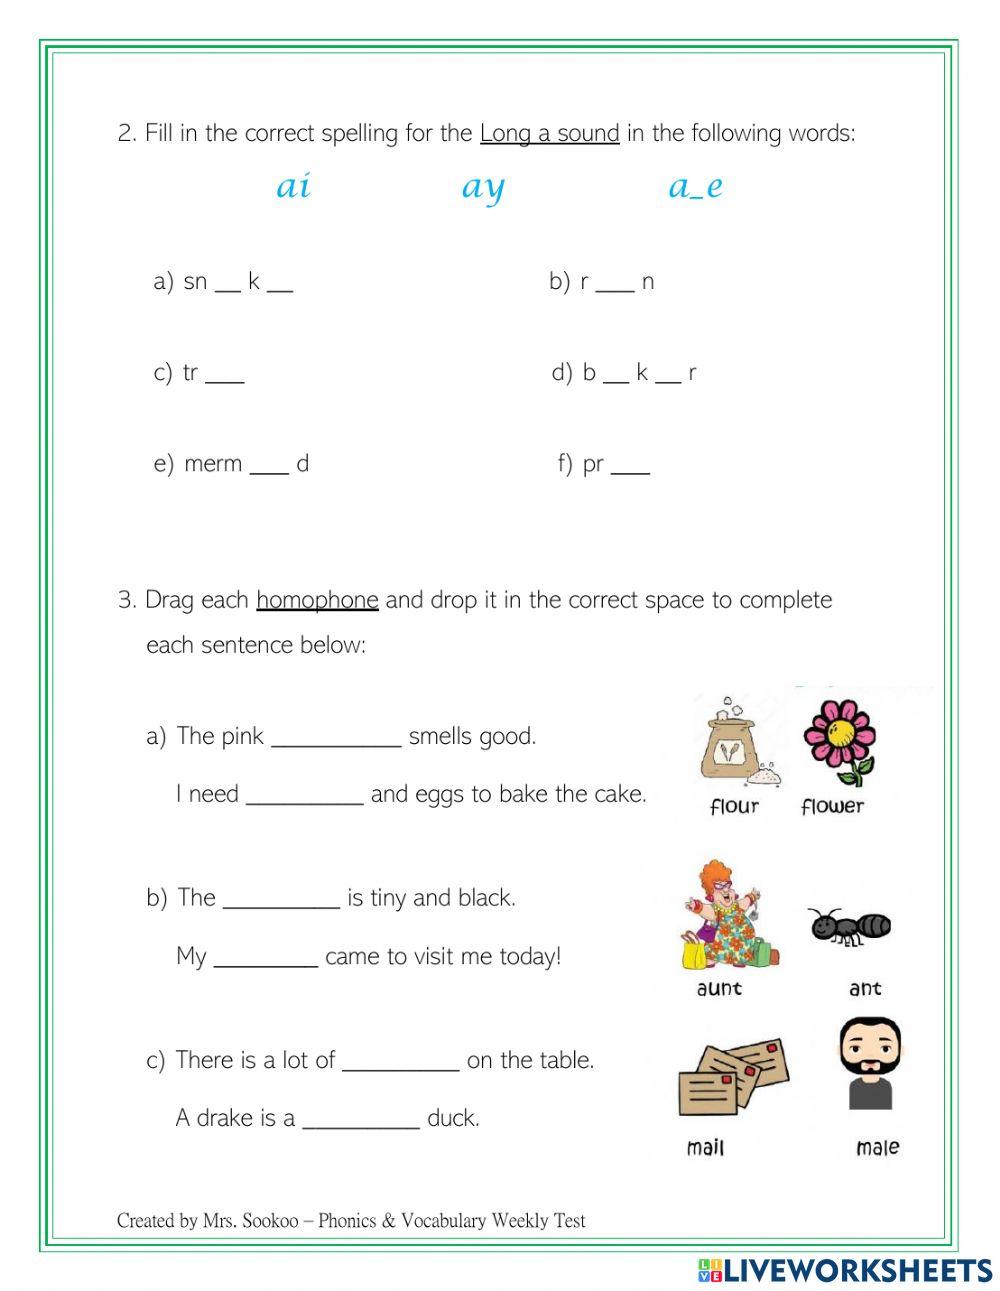 Phonics and Vocabulary Weekly Test 29th Oct